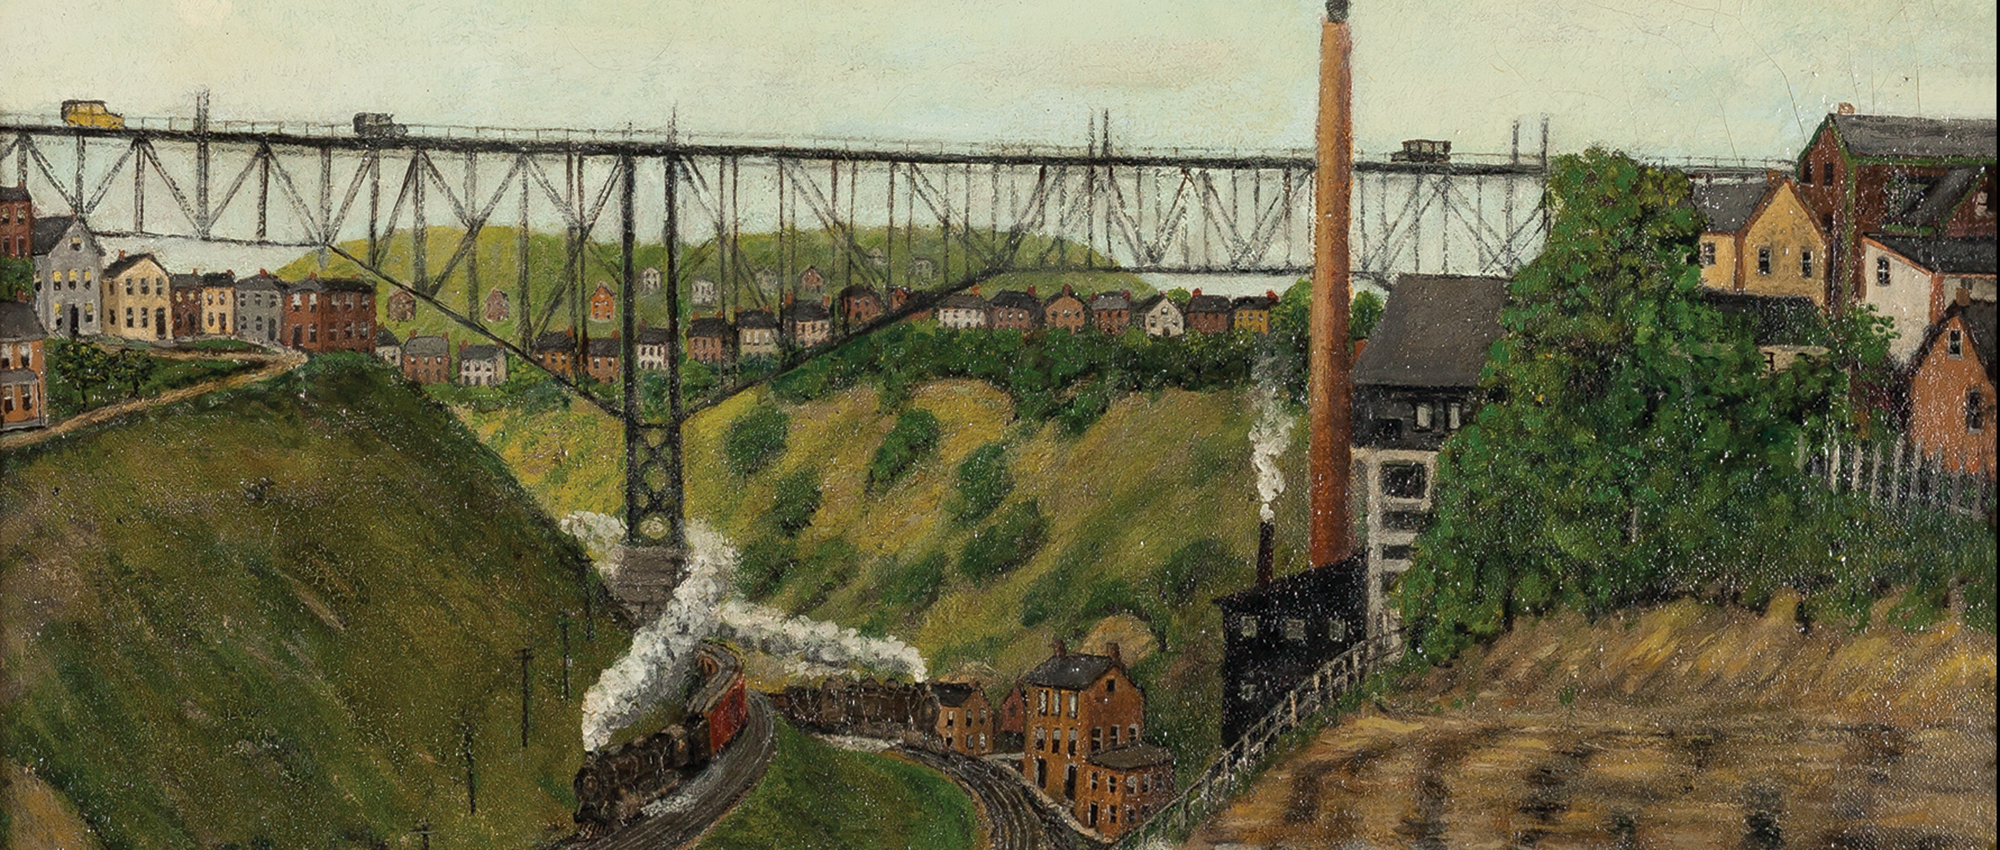 Painting of a valley with train tracks running beneath a bridge, there are houses on the hillsides and a boiler plant with a smoke stack on one side